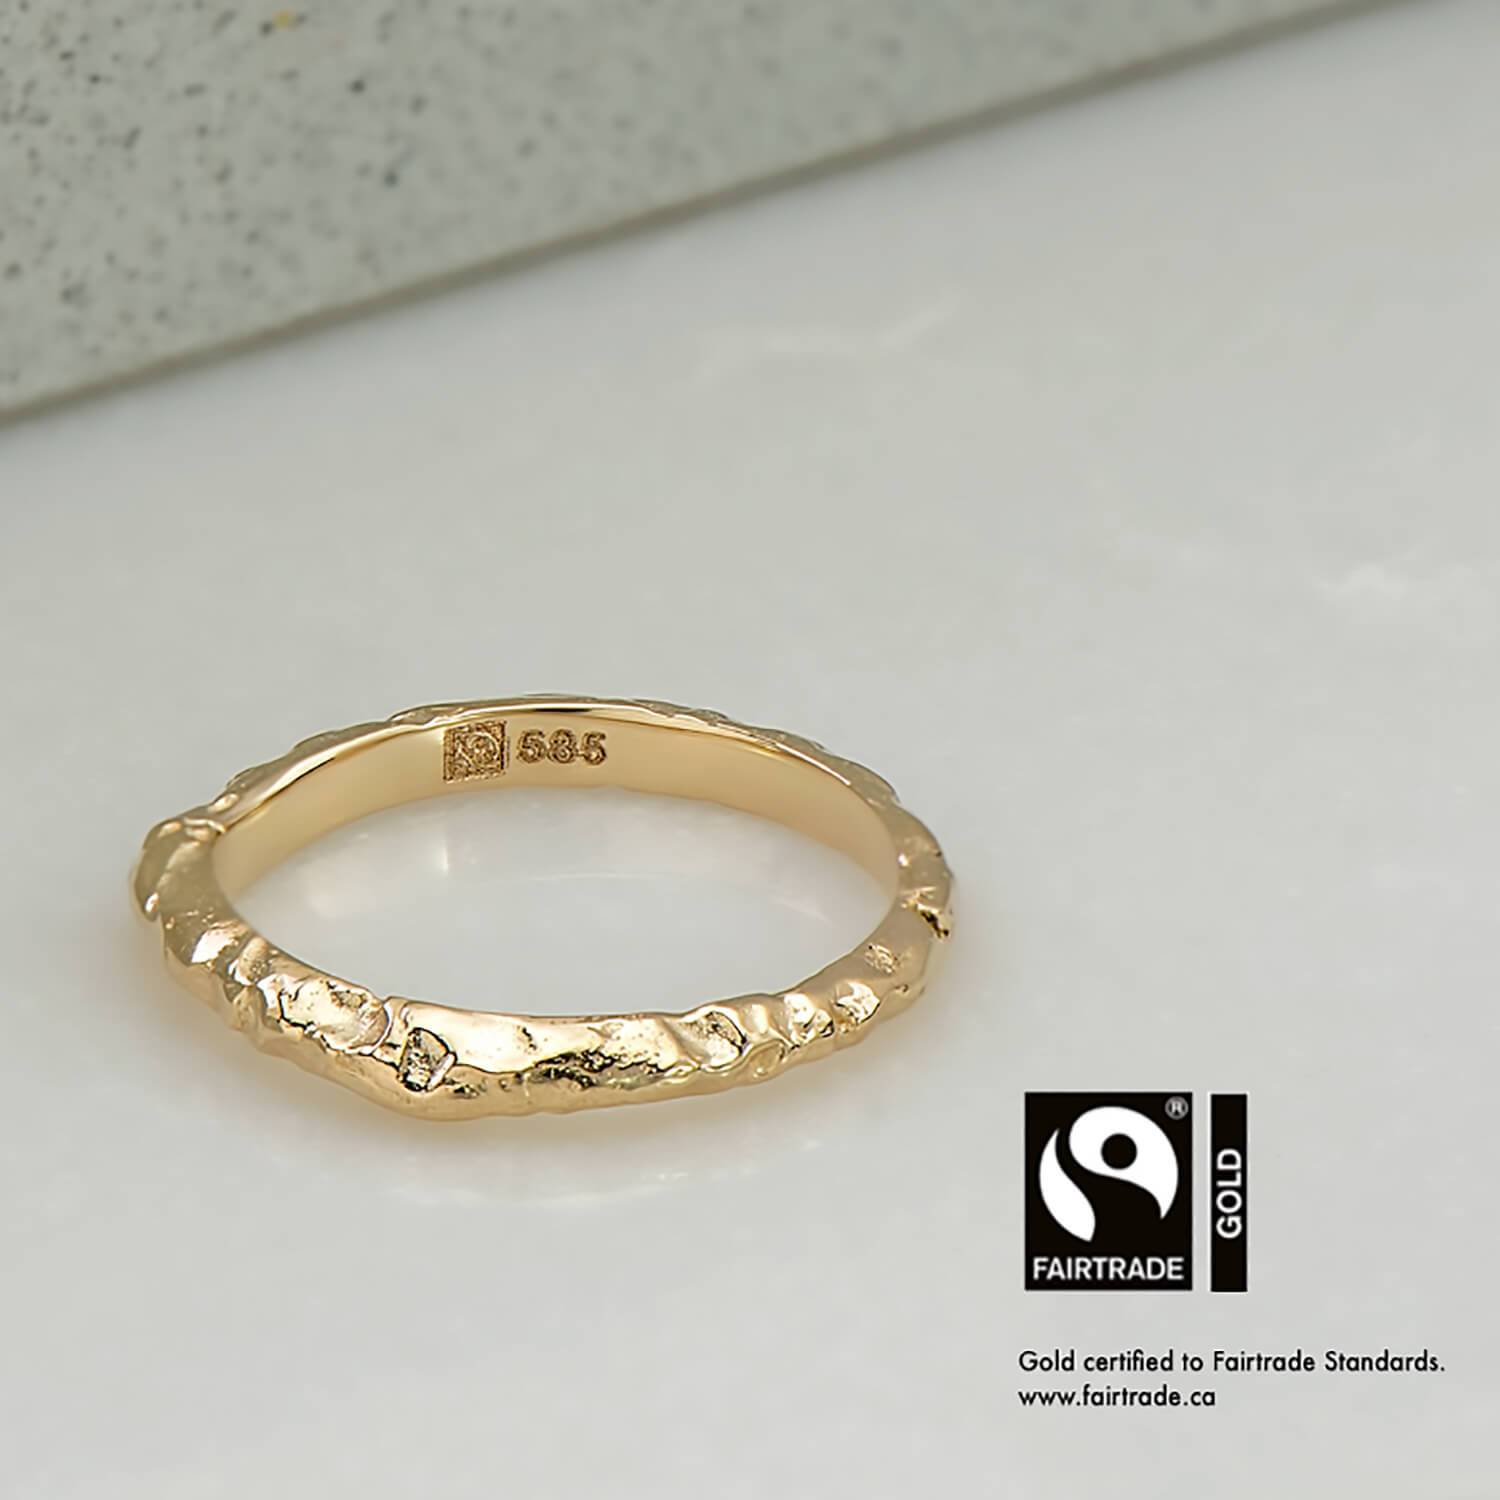 14 karat Fairtrade Certified yellow gold wedding ring with a with a cathedral profile and baroque carved surace. The ring is engraved with the Fairtrade logo and hallmarked 585.